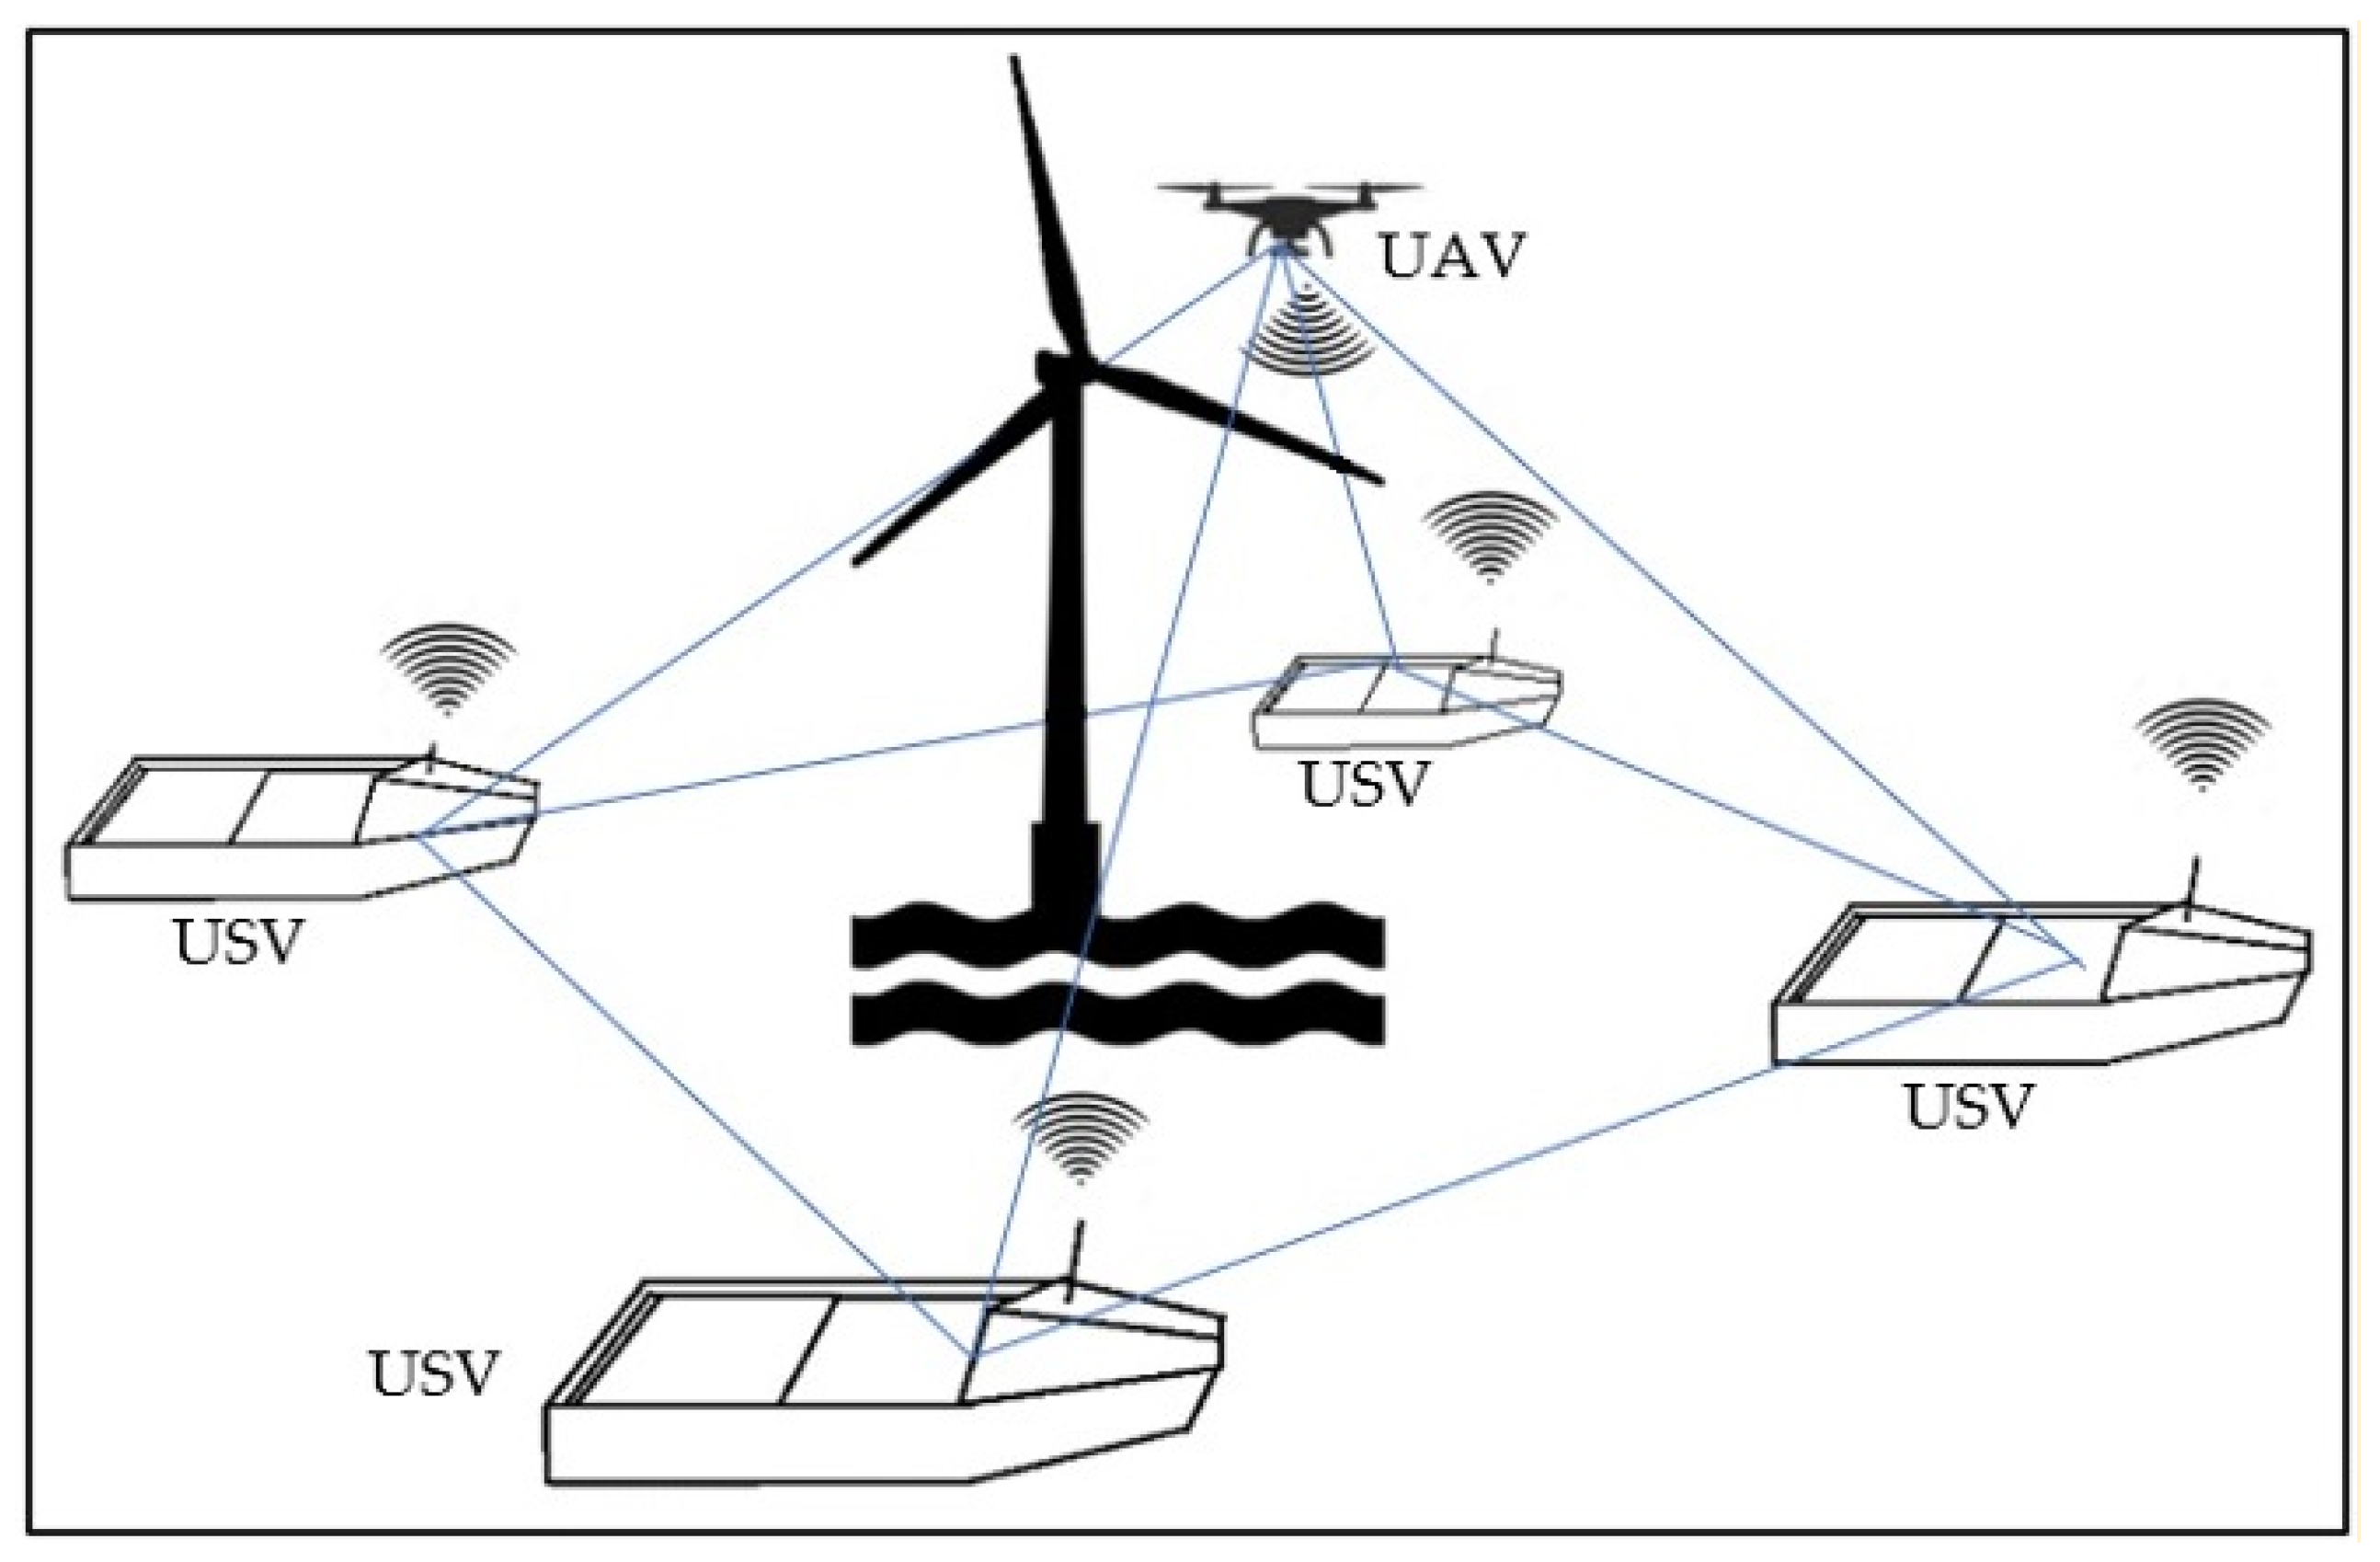 Uses, features and applications of drones - Iberdrola